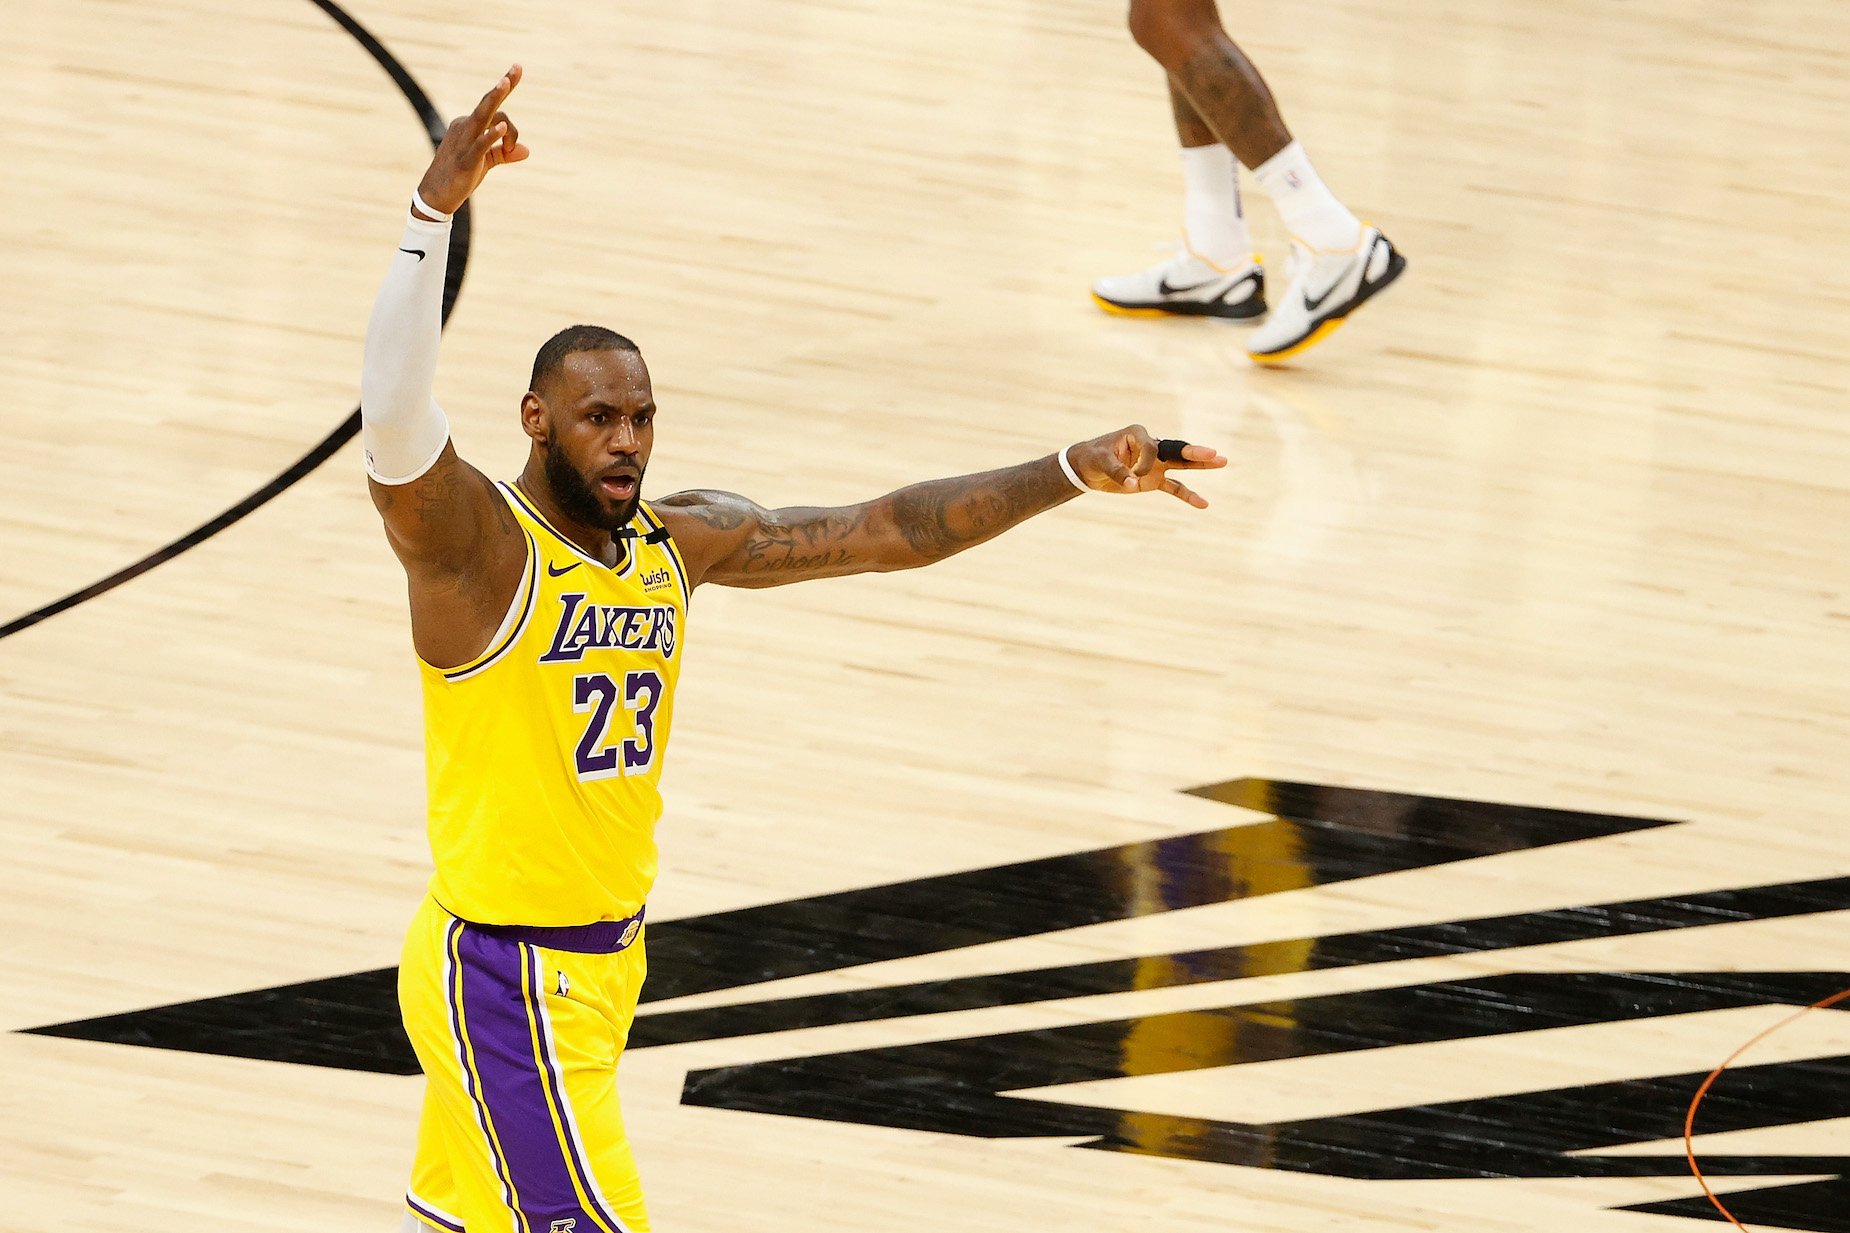 LA Lakers star. LeBron James celebrates a three-pointer during a NBA playoff game